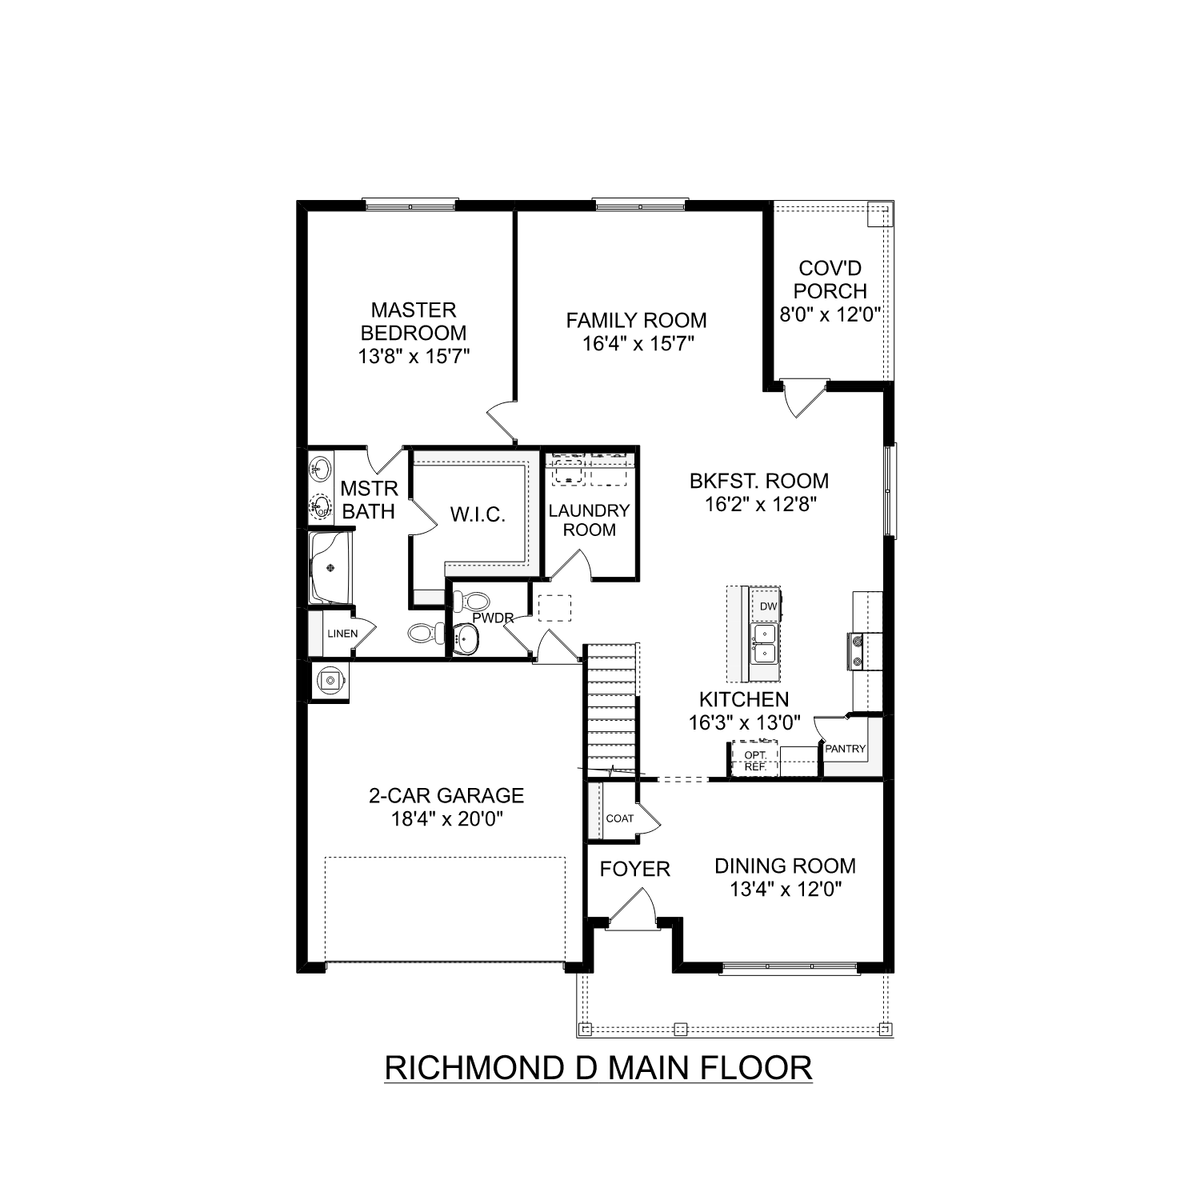 1 - The Richmond D buildable floor plan layout in Davidson Homes' Creekside community.